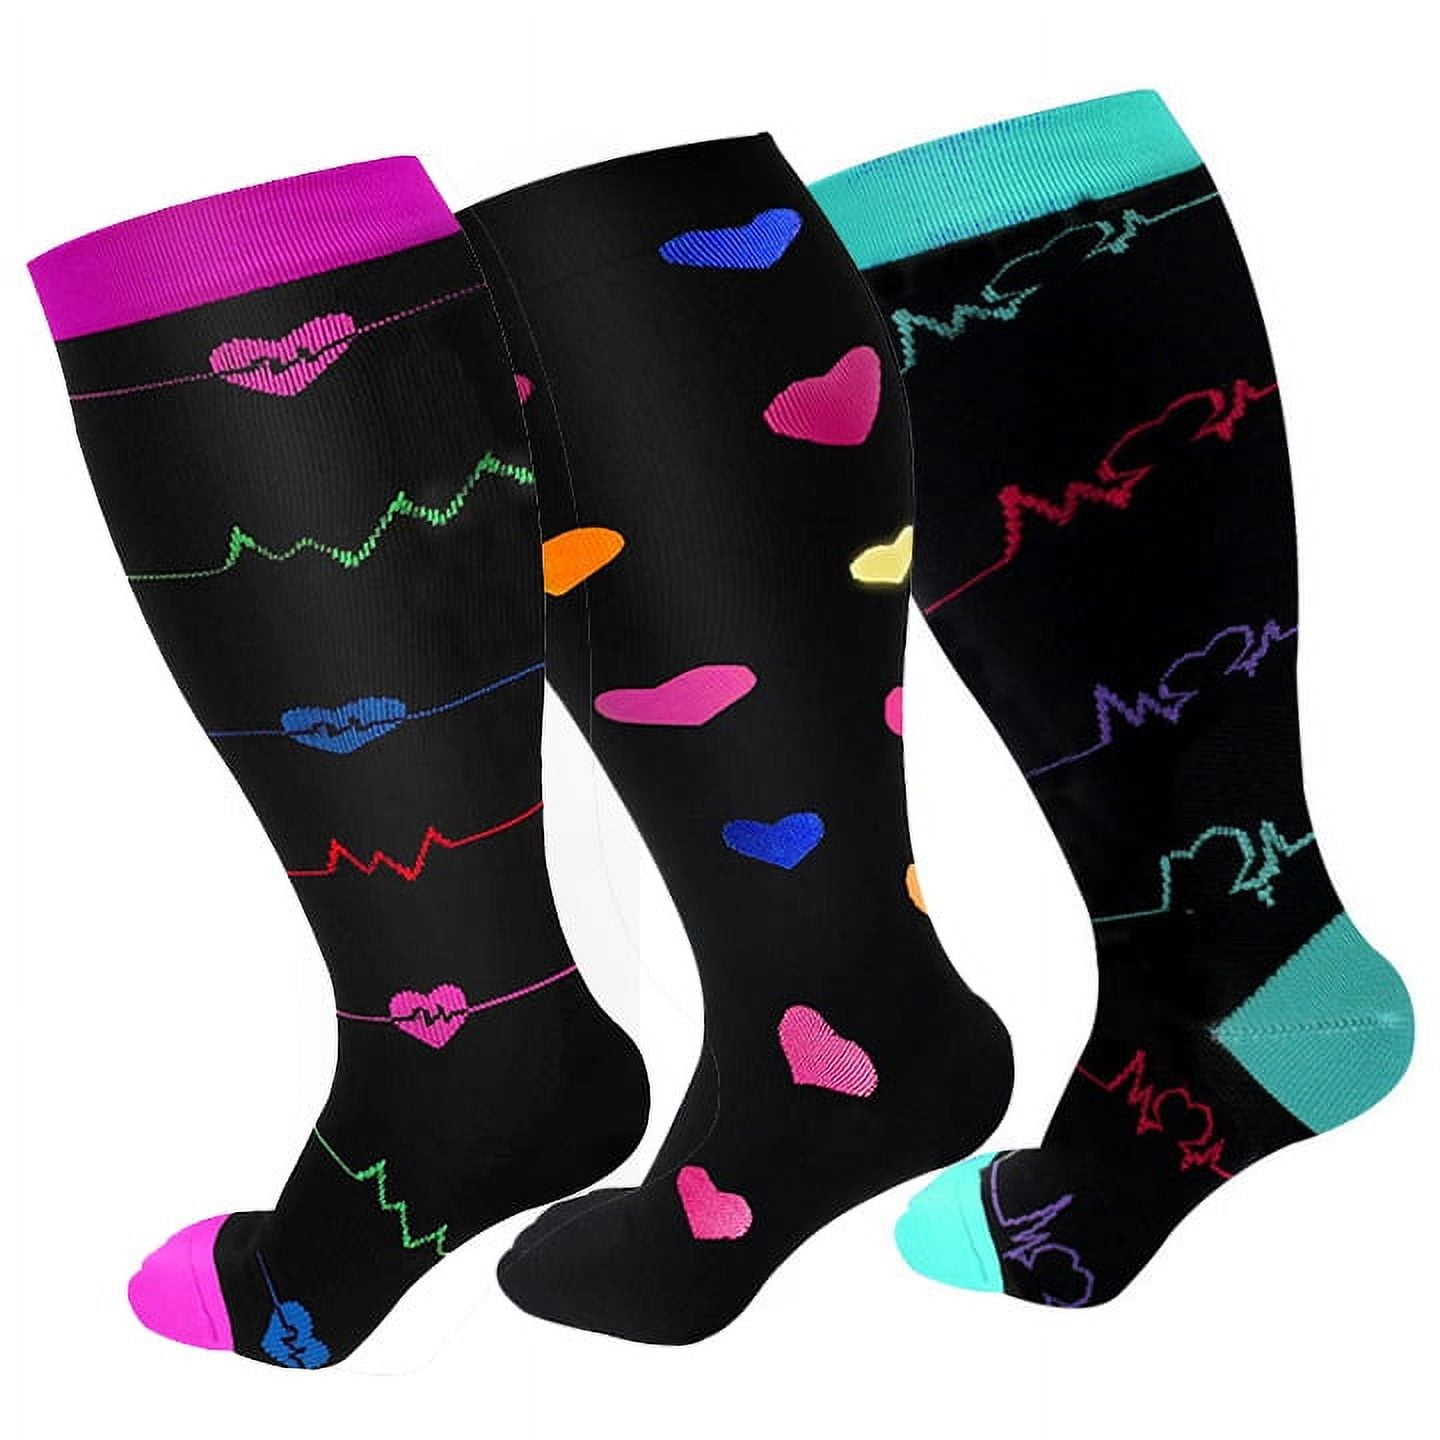  Extra Wide Calf Compression Socks for Women & Men, Plus Size  Compression Socks 20-30 mmHg, Knee High Stockings to Prevent Swelling, Pain  : Clothing, Shoes & Jewelry